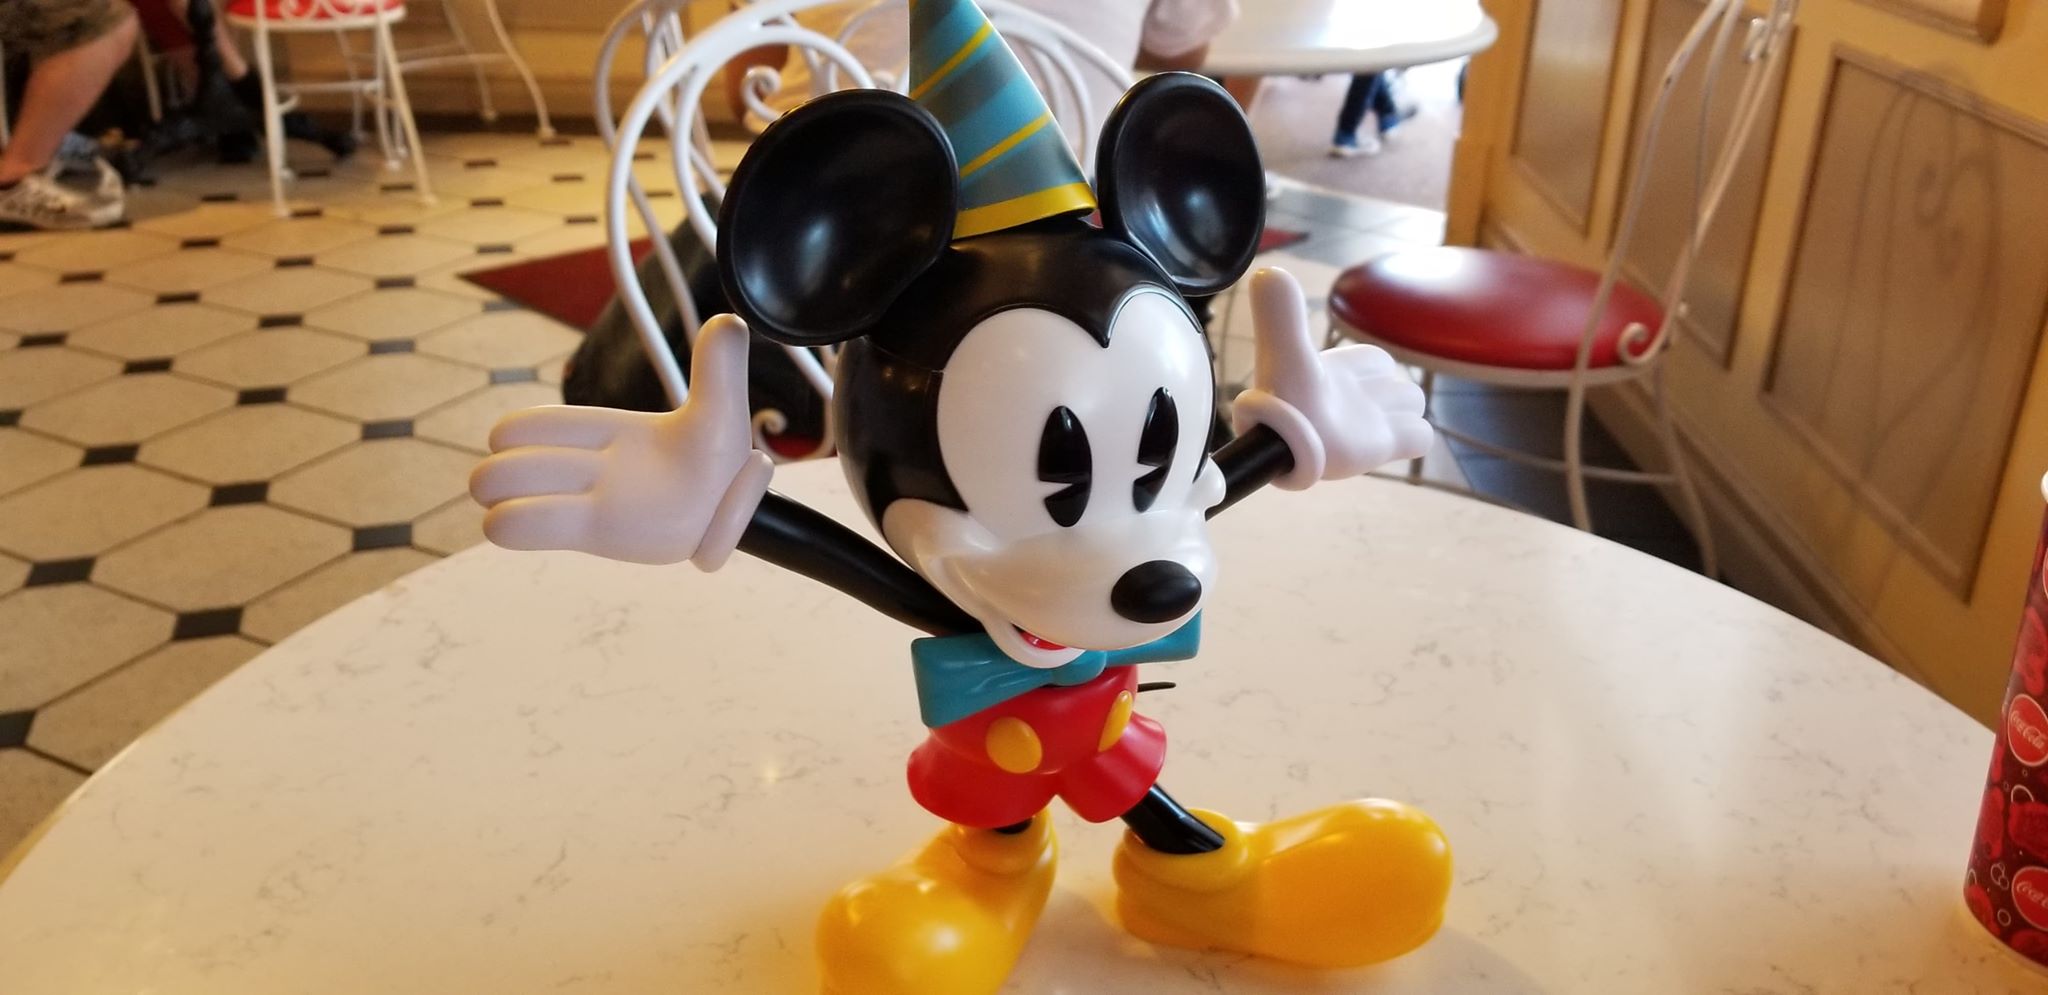 The Mickey Celebration Sipper Has Returned To Magic Kingdom